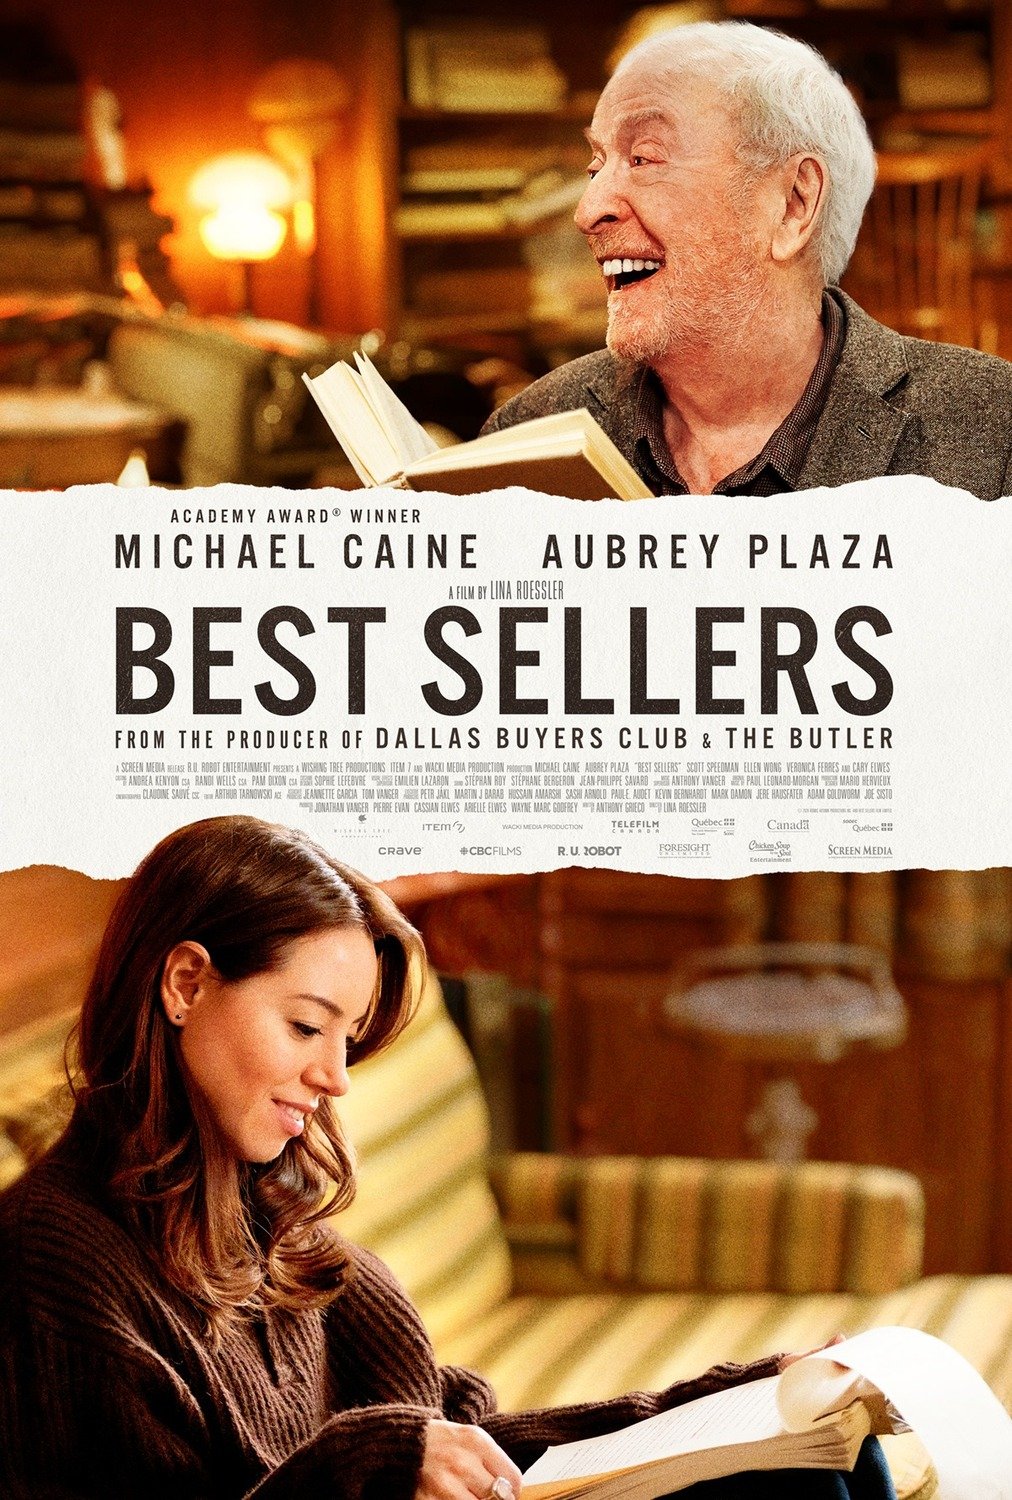 Best Sellers : Affiche